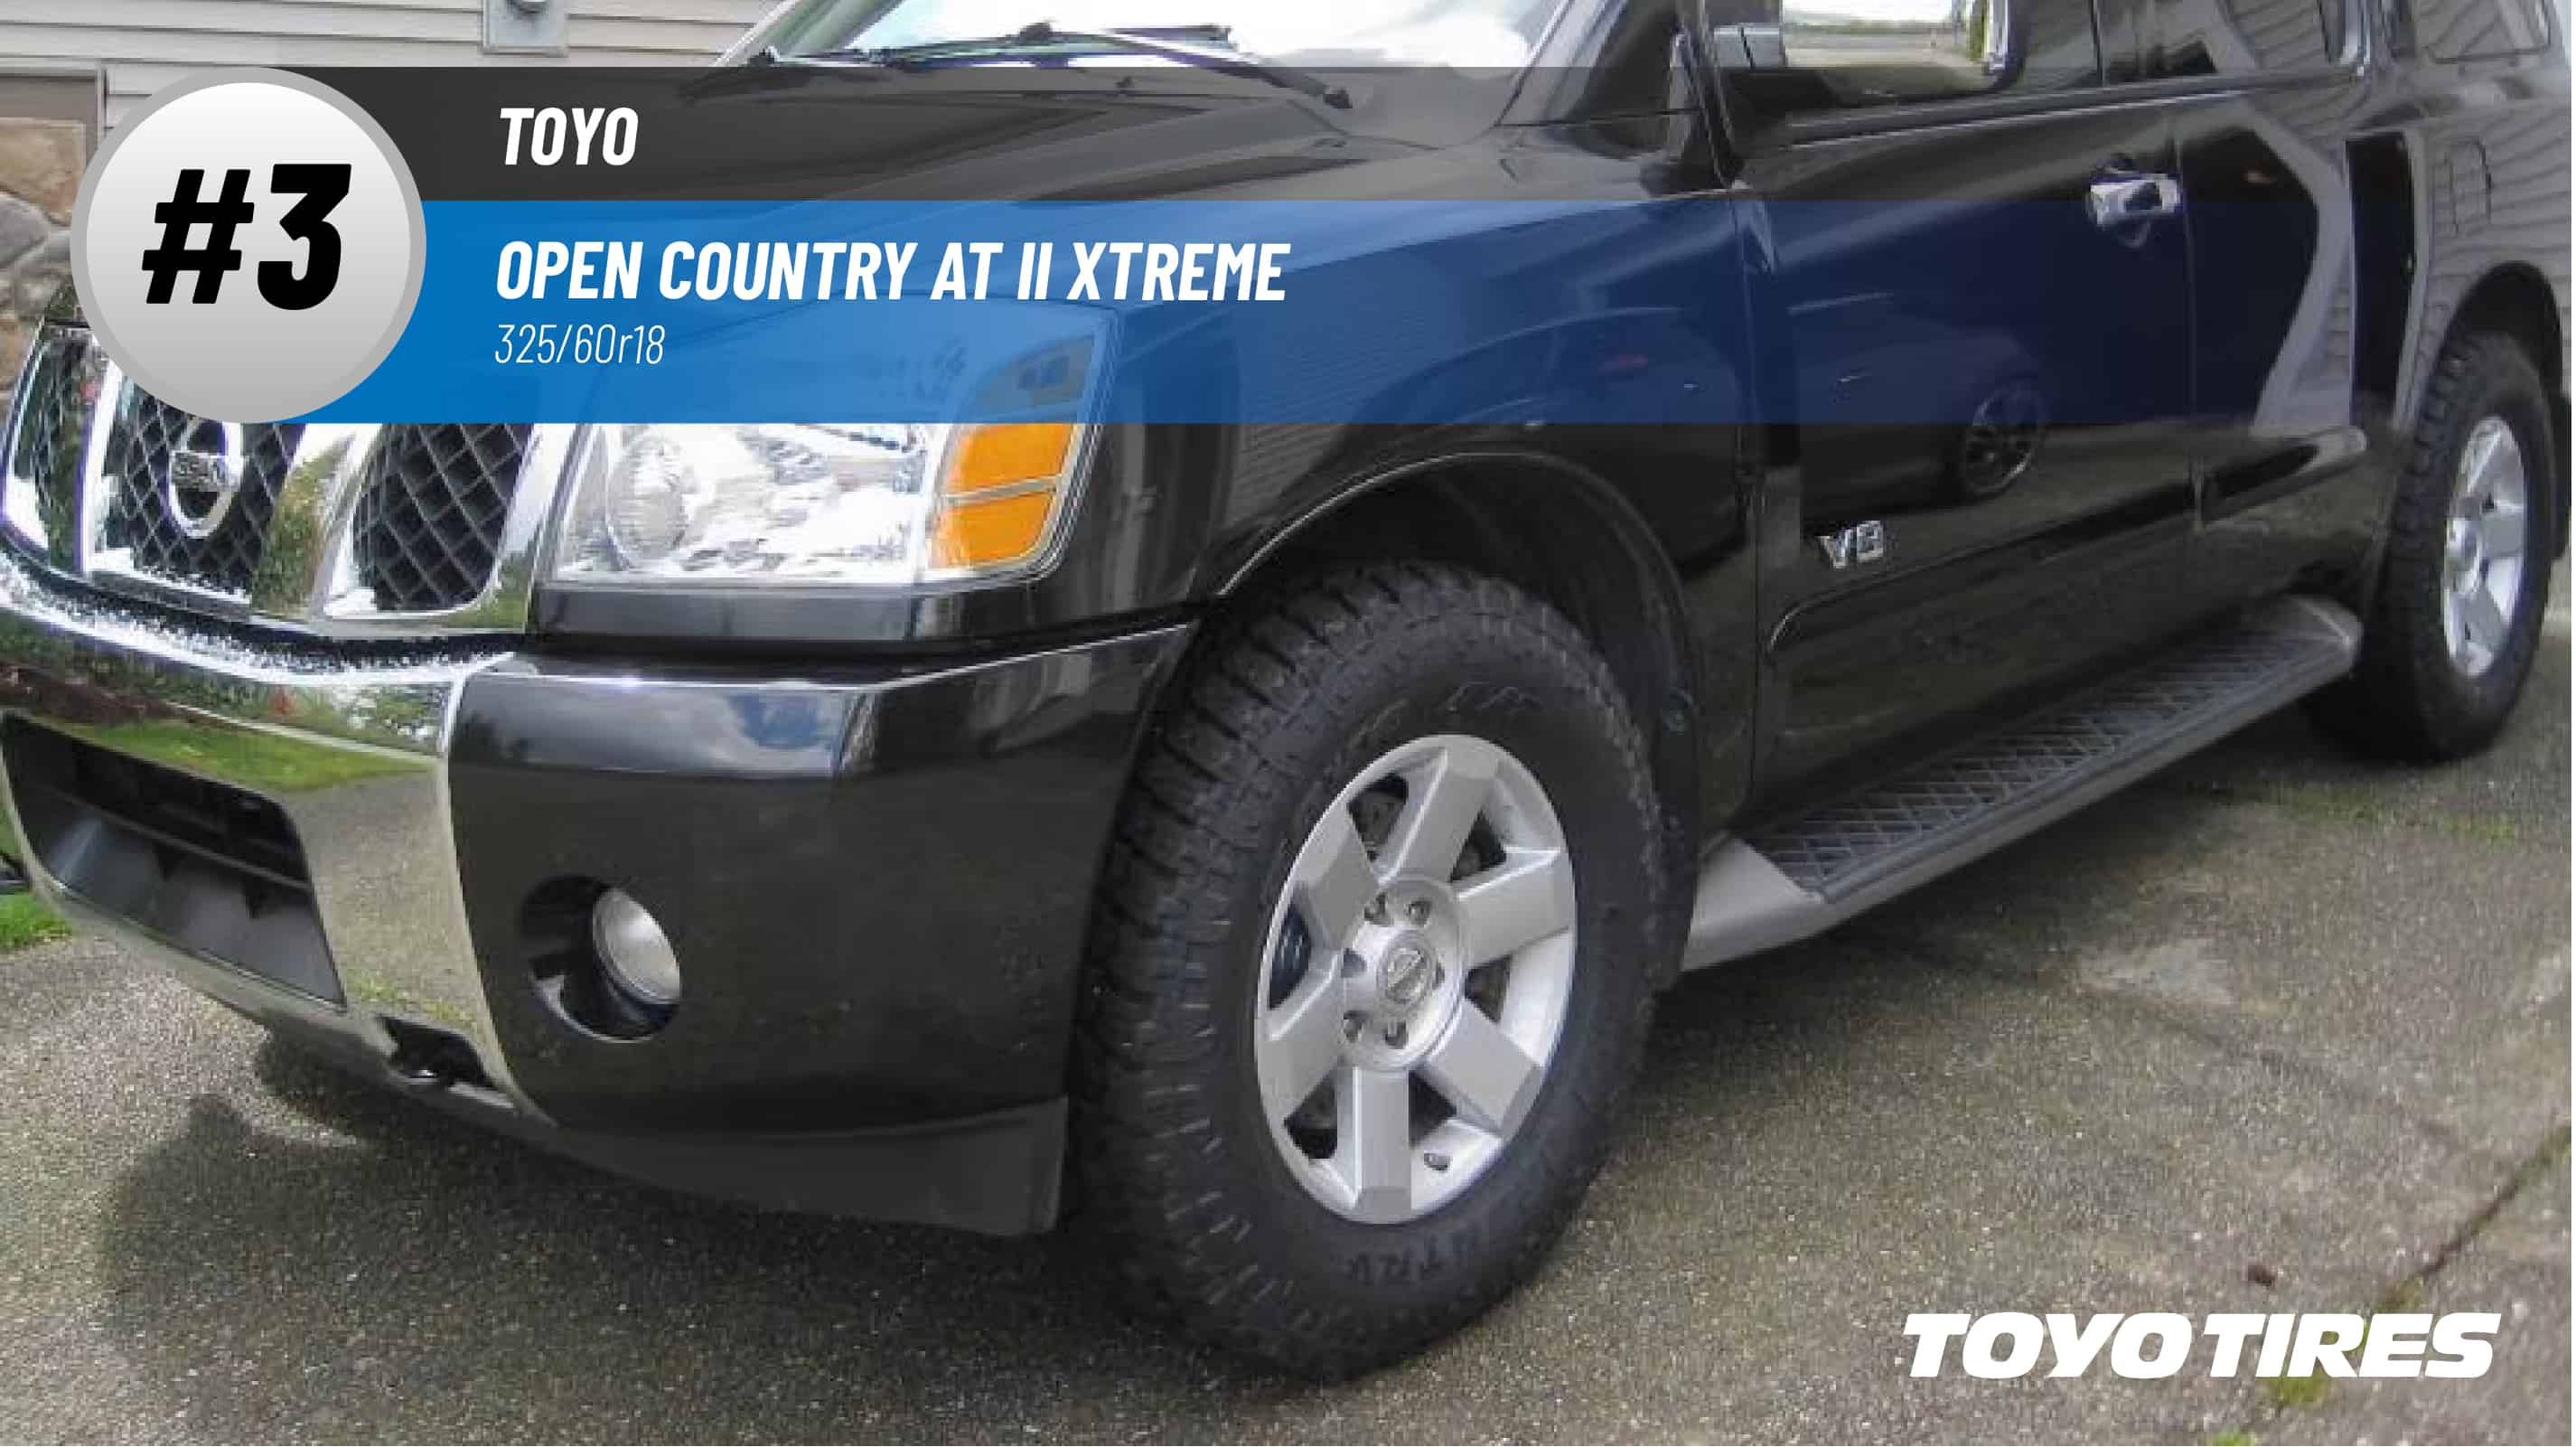 Top #3 All Terrain: Toyo Open Country AT II Xtreme -best 325/60r18